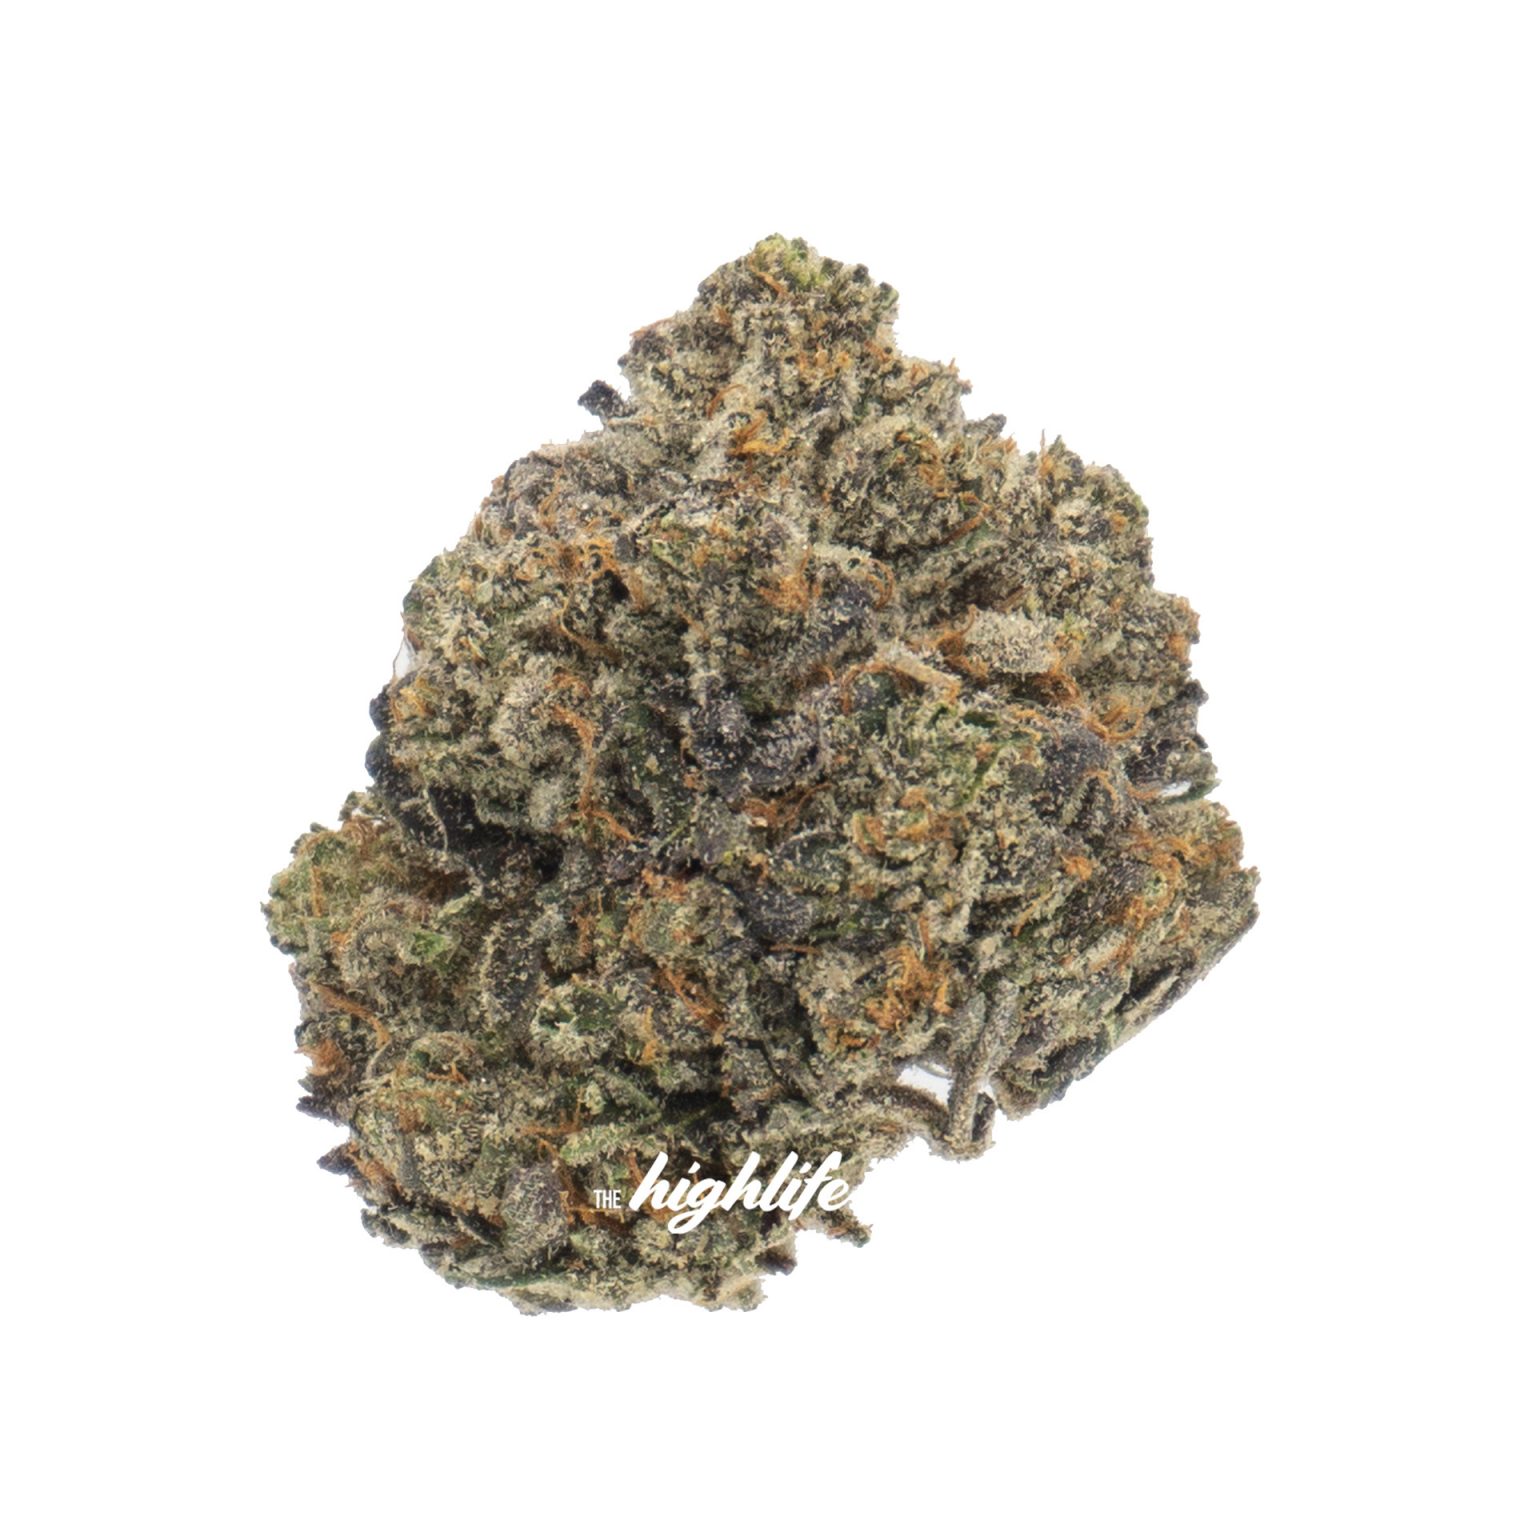 buy death bubba weed in ottawa same day delivery